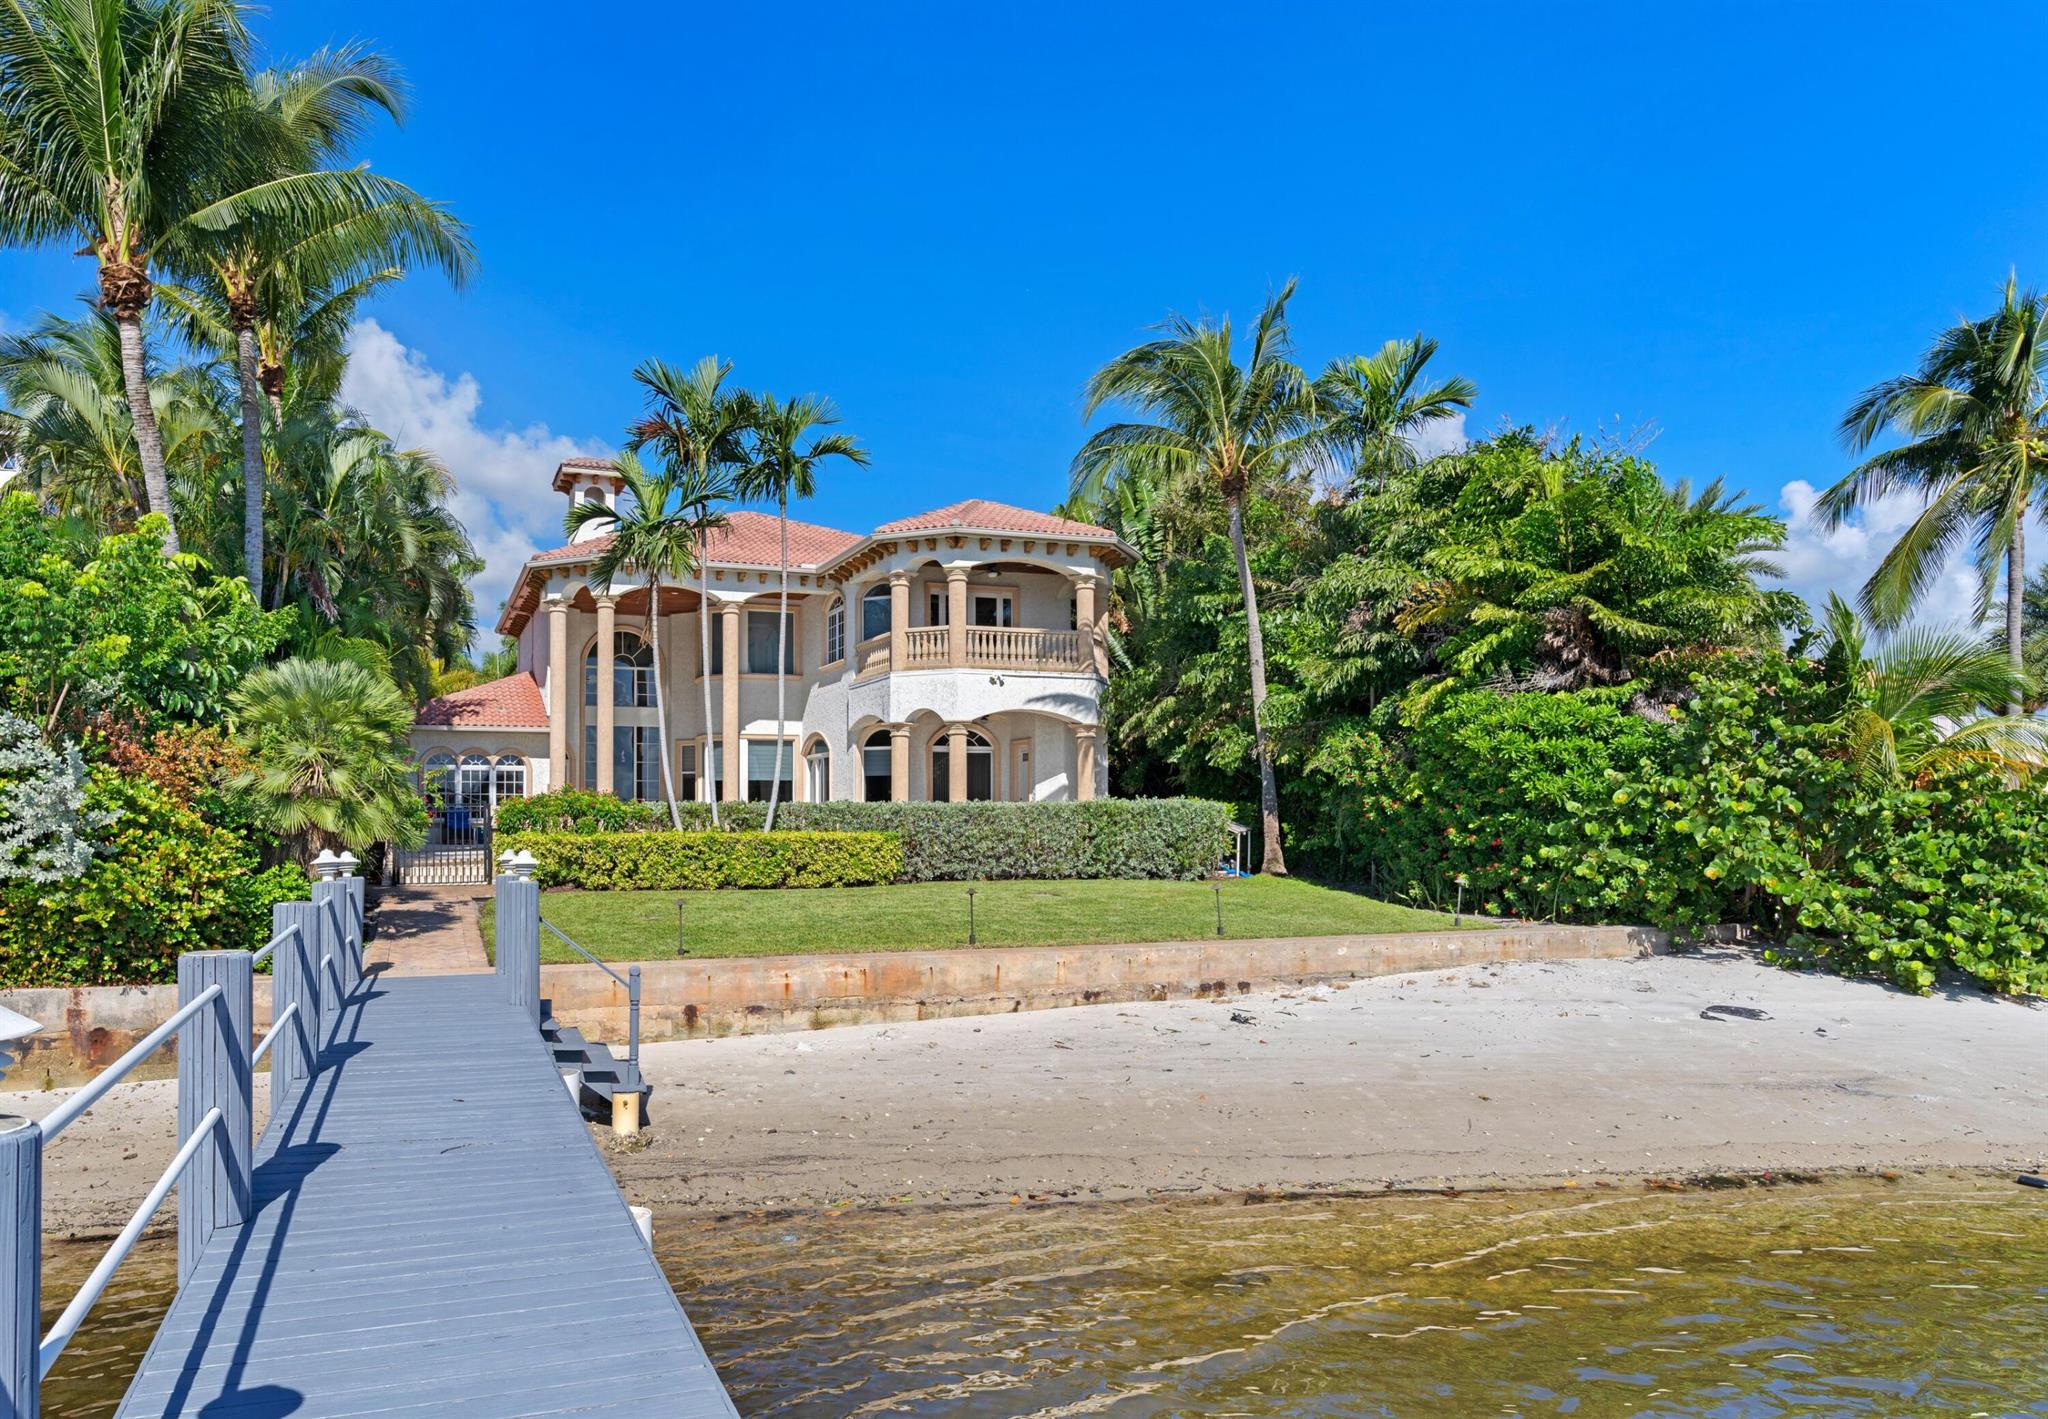 Direct Intracoastal Mediterranean style waterfront home with a private dock, and fabulous views. Built in 2003 this home boasts over 7300 sq. ft., the living areas are 5244 sq. ft. 6 bedrooms, with 1 used as an office, and 6 1/2 baths. All impact glass windows, and doors, solid CBS construction, and a 3 car garage. Completely walled, with gated entry, and large parking area. The foyer entry is a 2 story atrium in design, with stone finished walls, and a beautiful marble staircase. The living area has all marble flooring. Gourmet kitchen with gas appliances, all facing the water, and opening to the great room. The 1st floor has 4 bedrooms, the master BR is on the 2nd floor, with a large mixed use game room/office with elevator access. 76 Ft, on the water, with ocean access and no bridges.